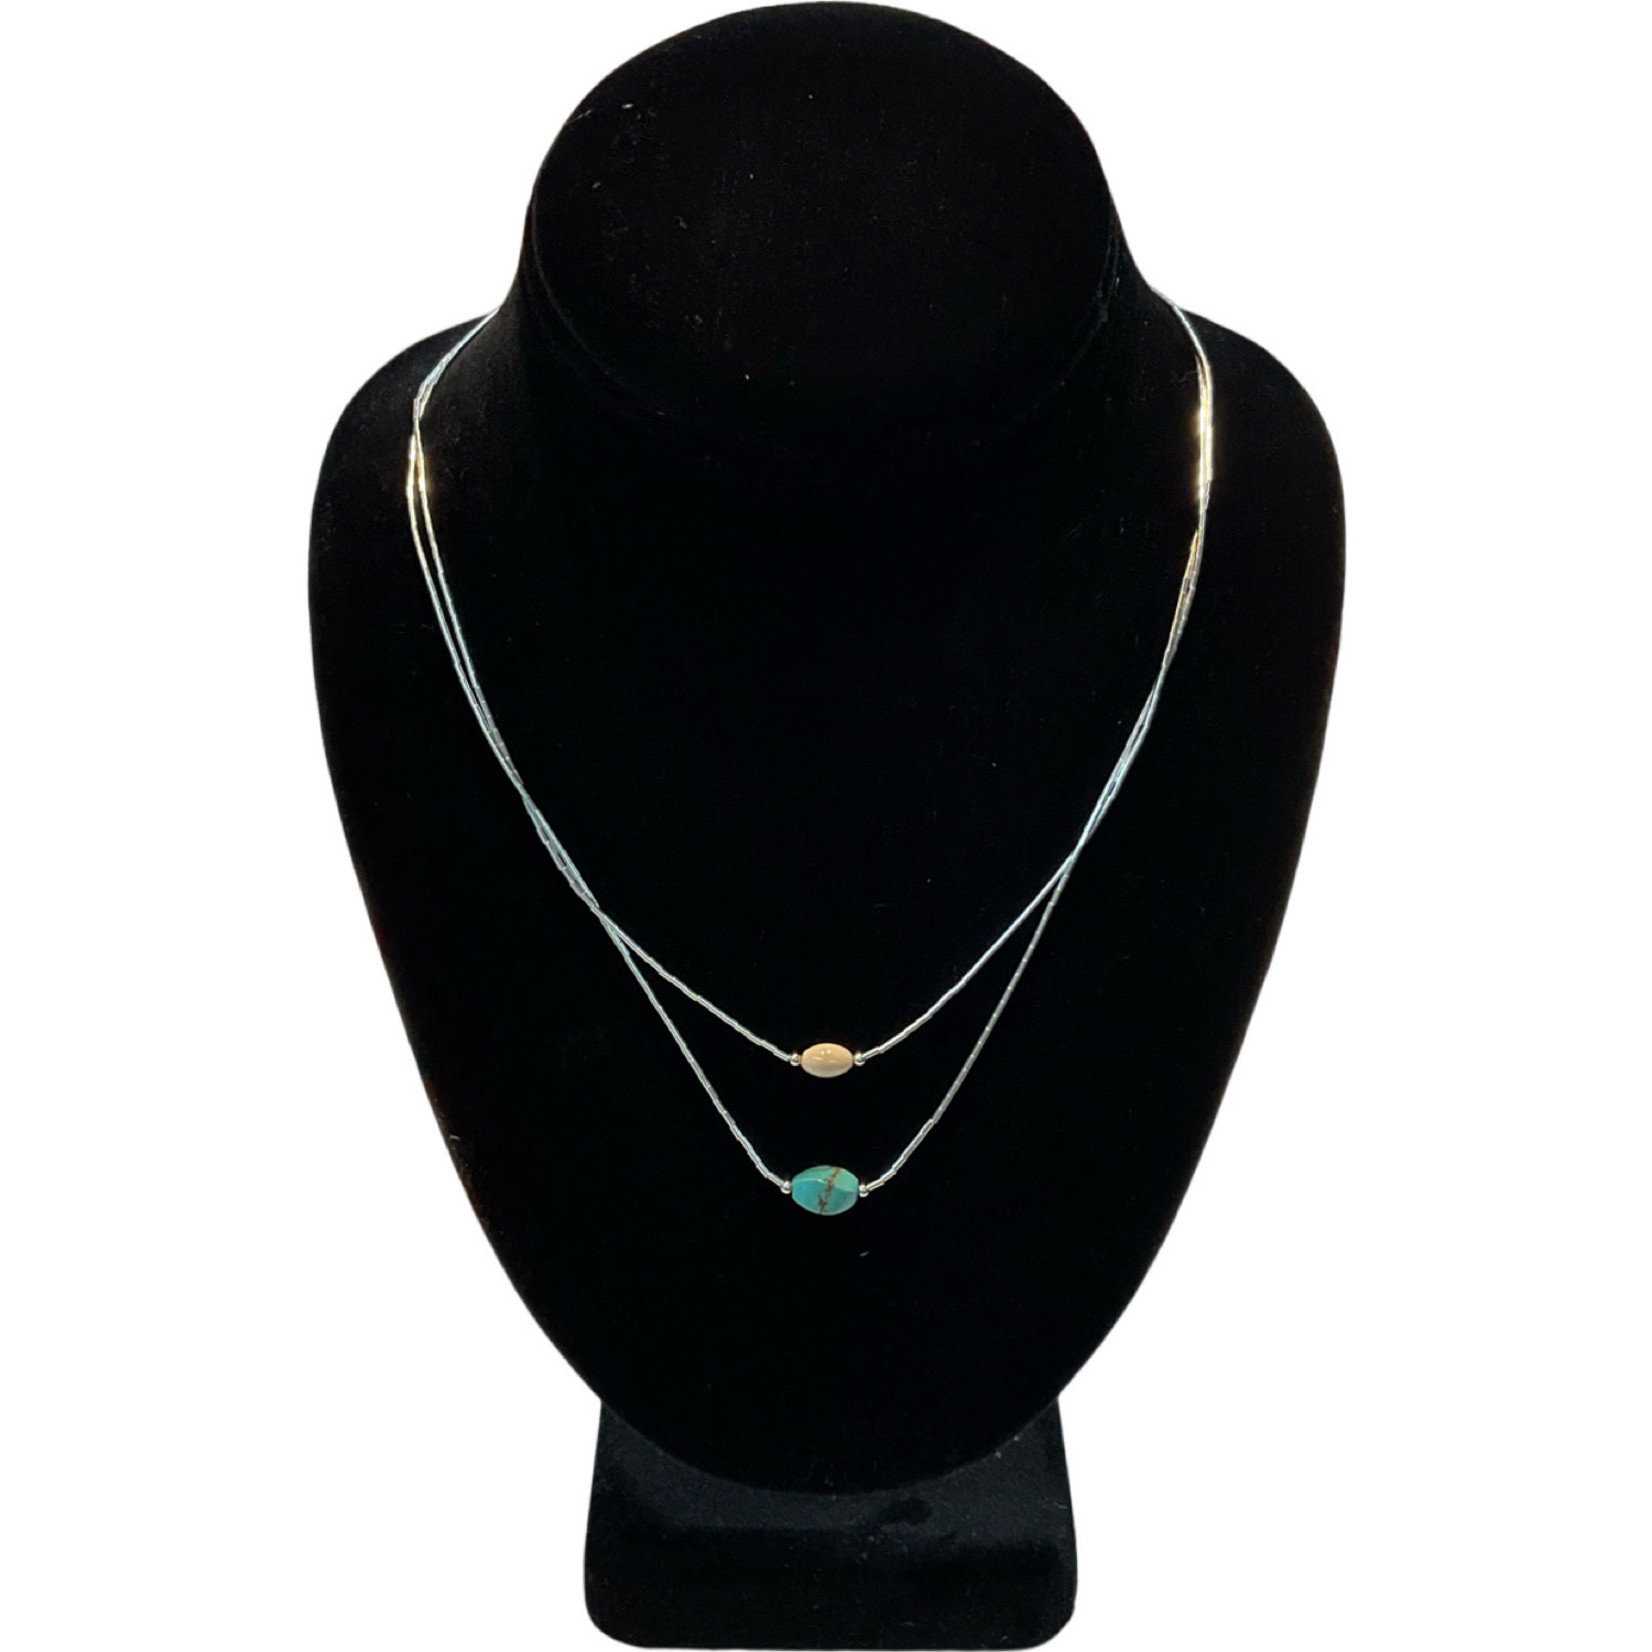 Bering Sea Designs Woolly Mammoth Ivory & Turquoise Necklace